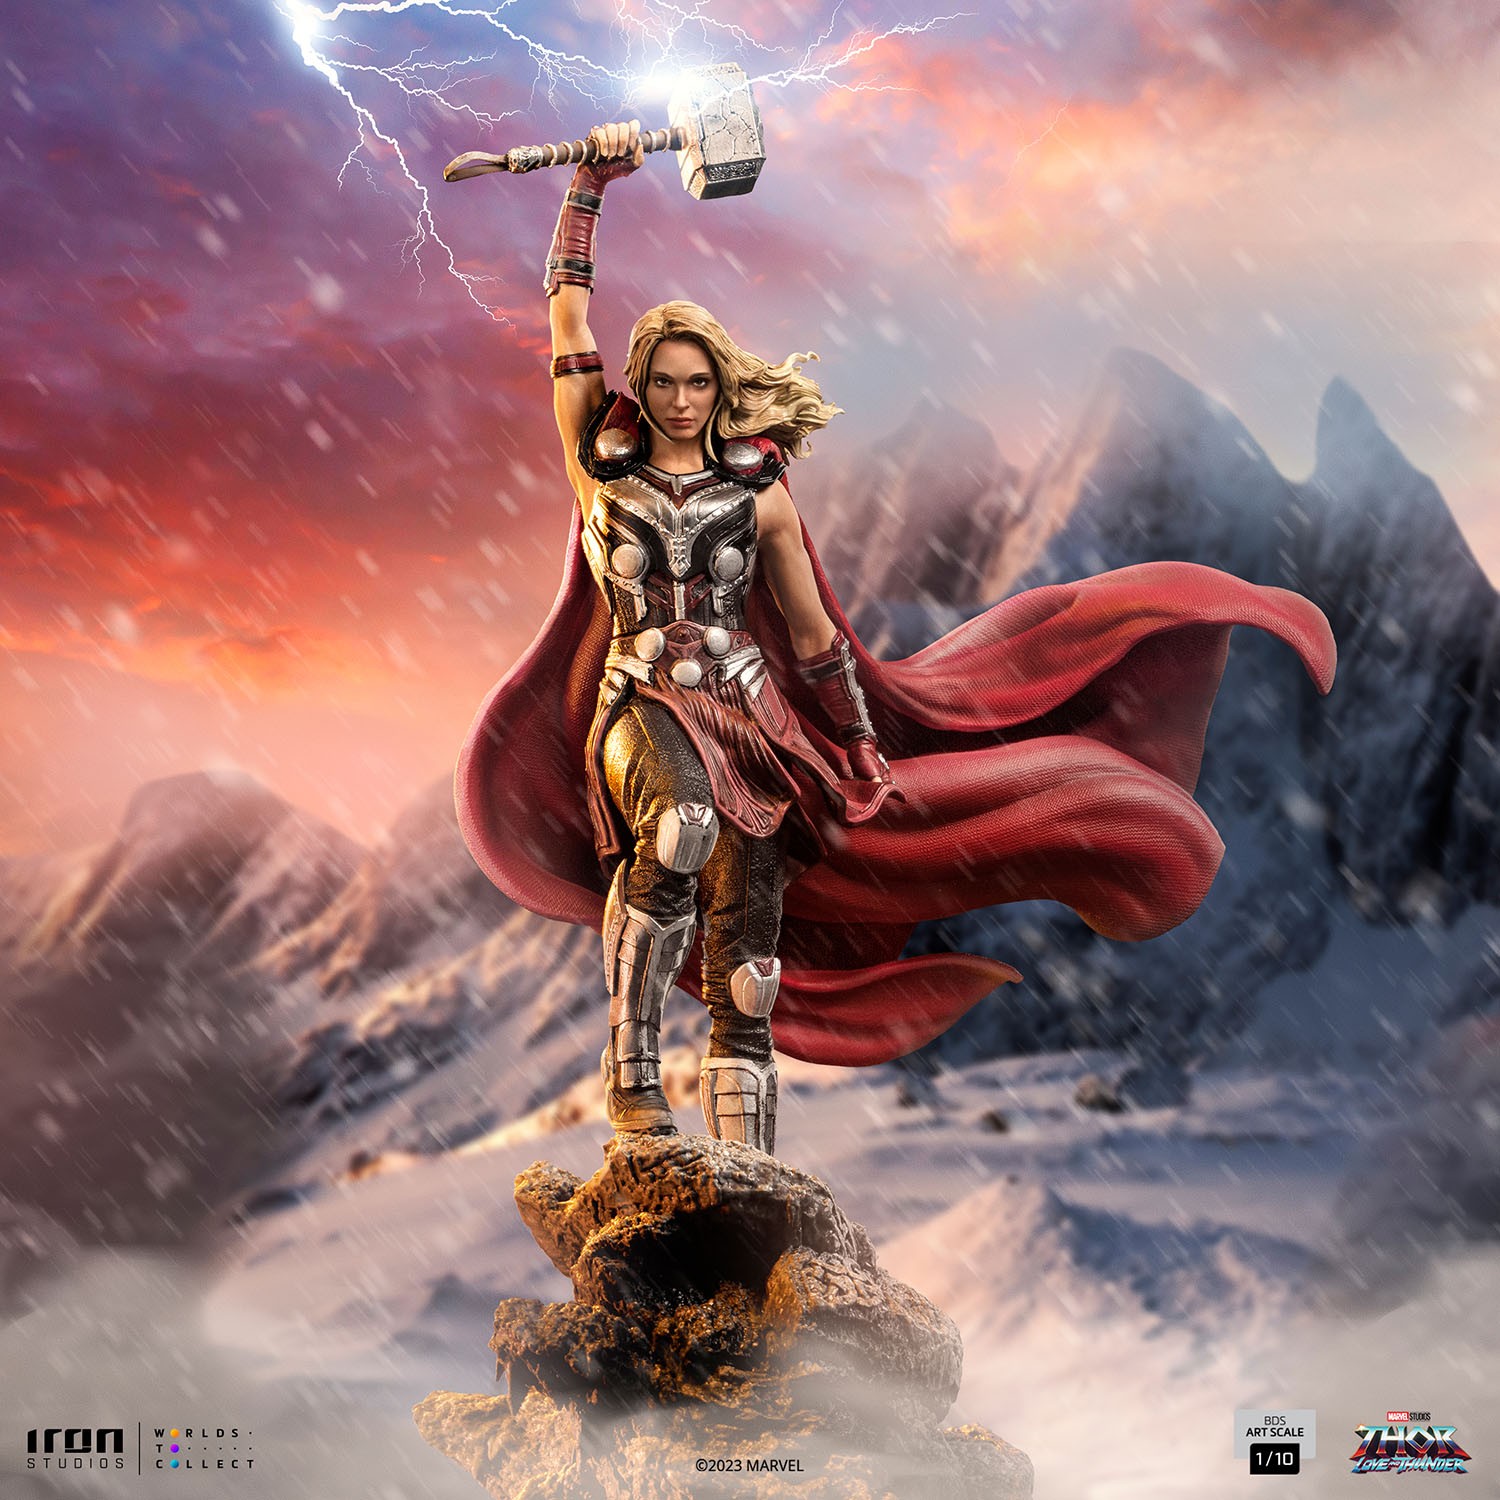 Mighty Thor (Jane Foster)- Prototype Shown